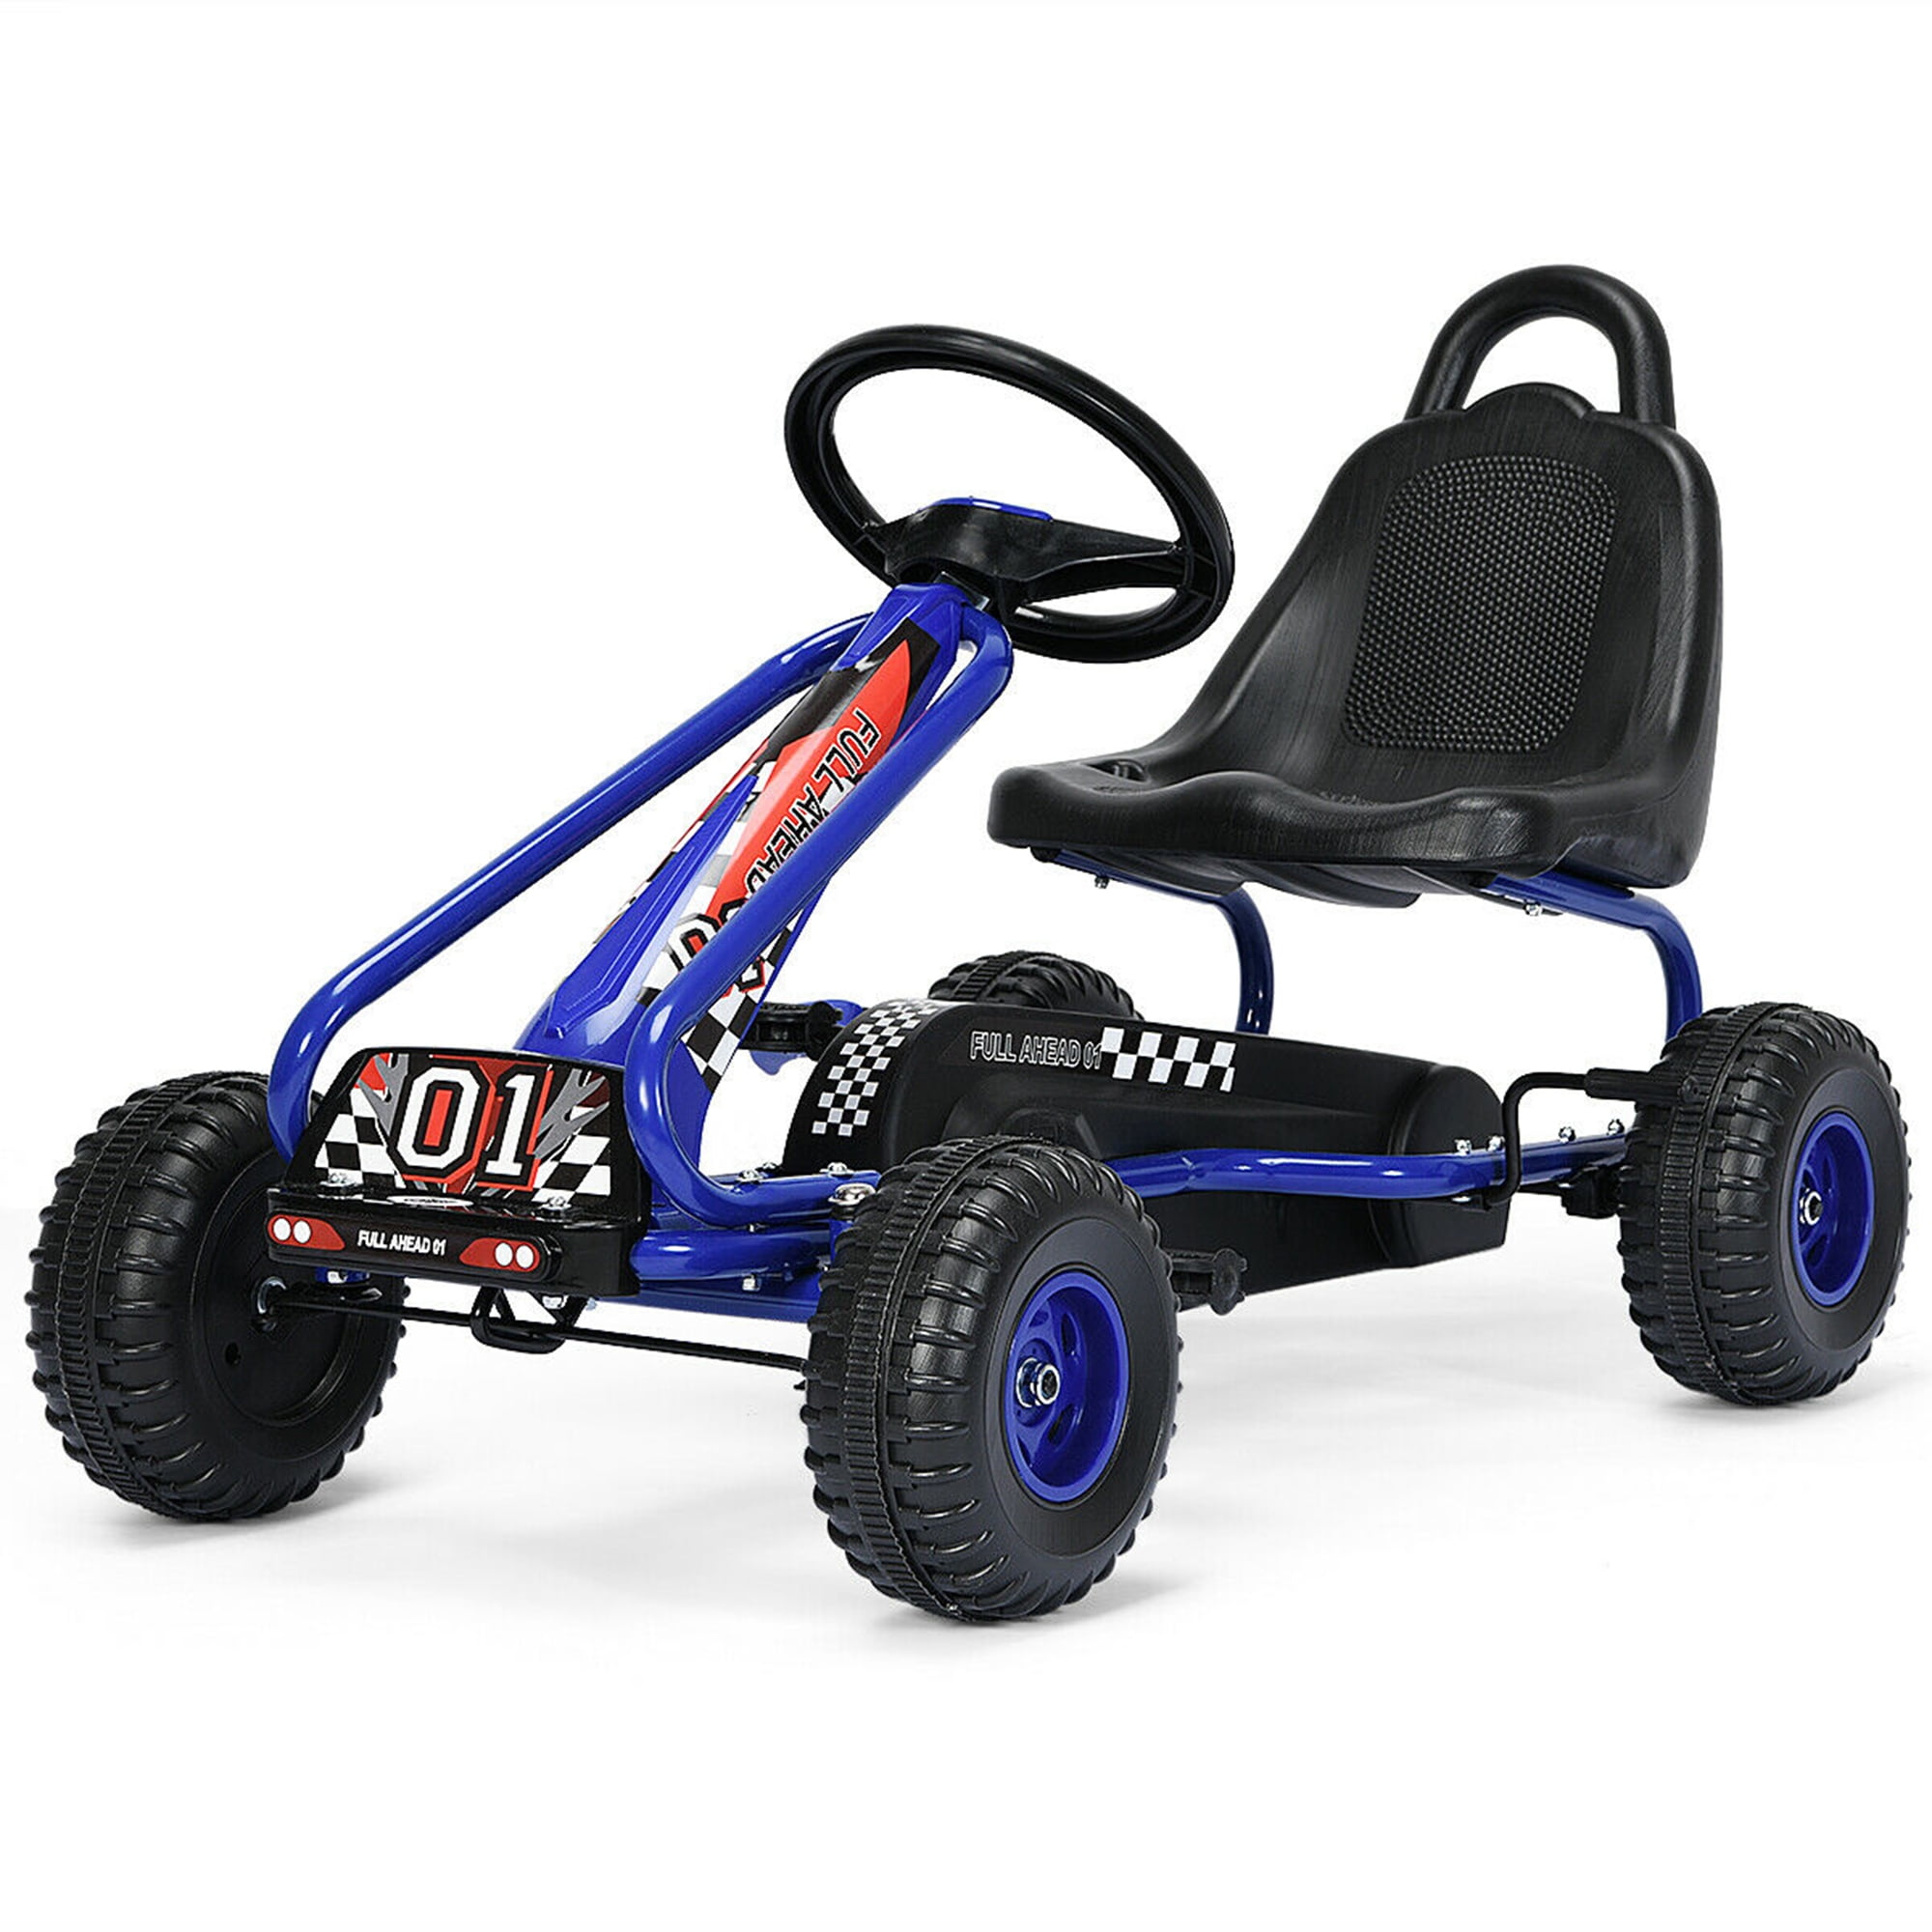 CHILDRENS KIDS BLUE PEDAL GO KART CART WITH INFLATABLE WHEELS AND HAND BRAKE 